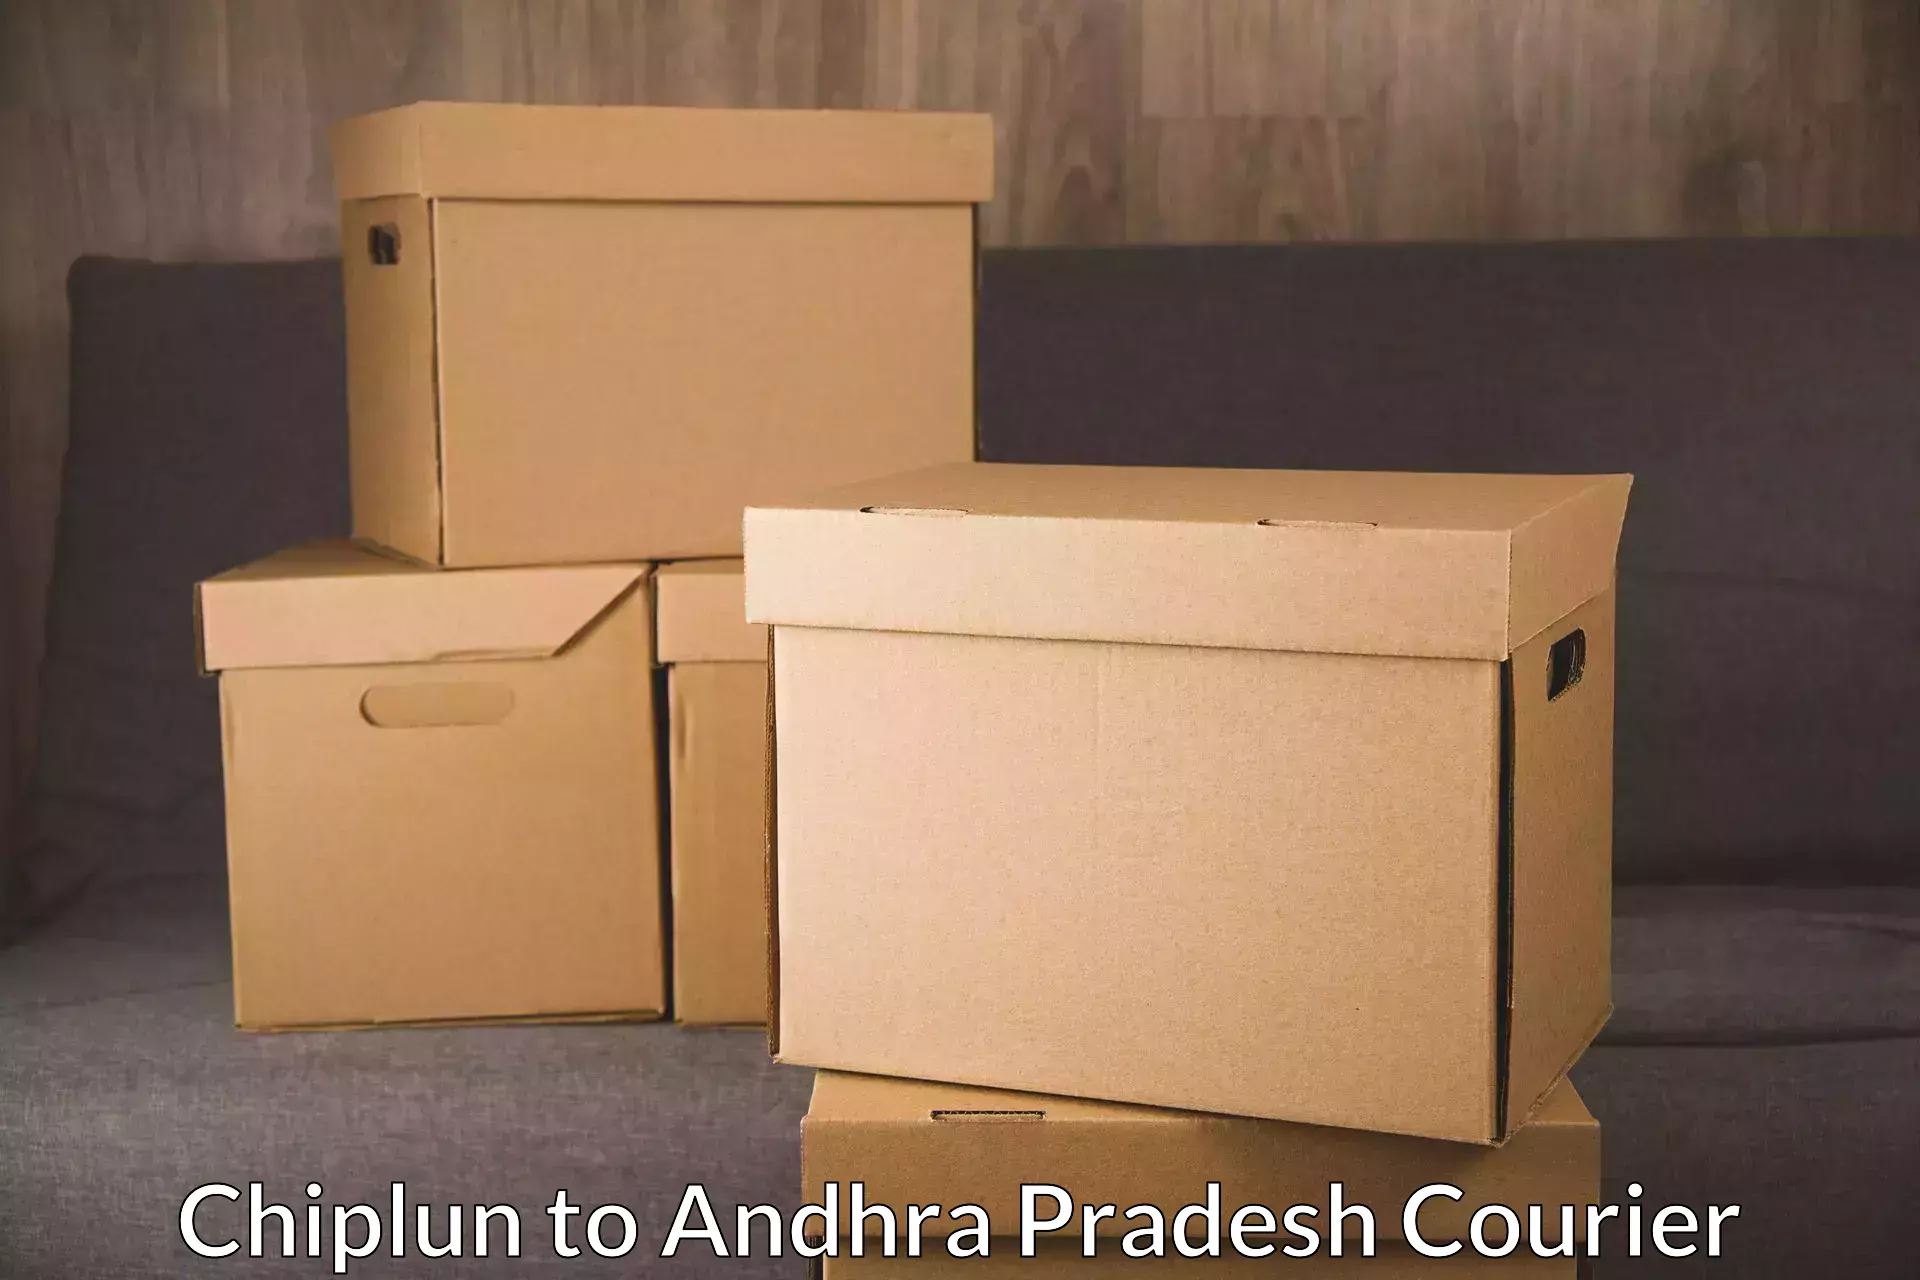 Discount courier rates Chiplun to Visakhapatnam Port